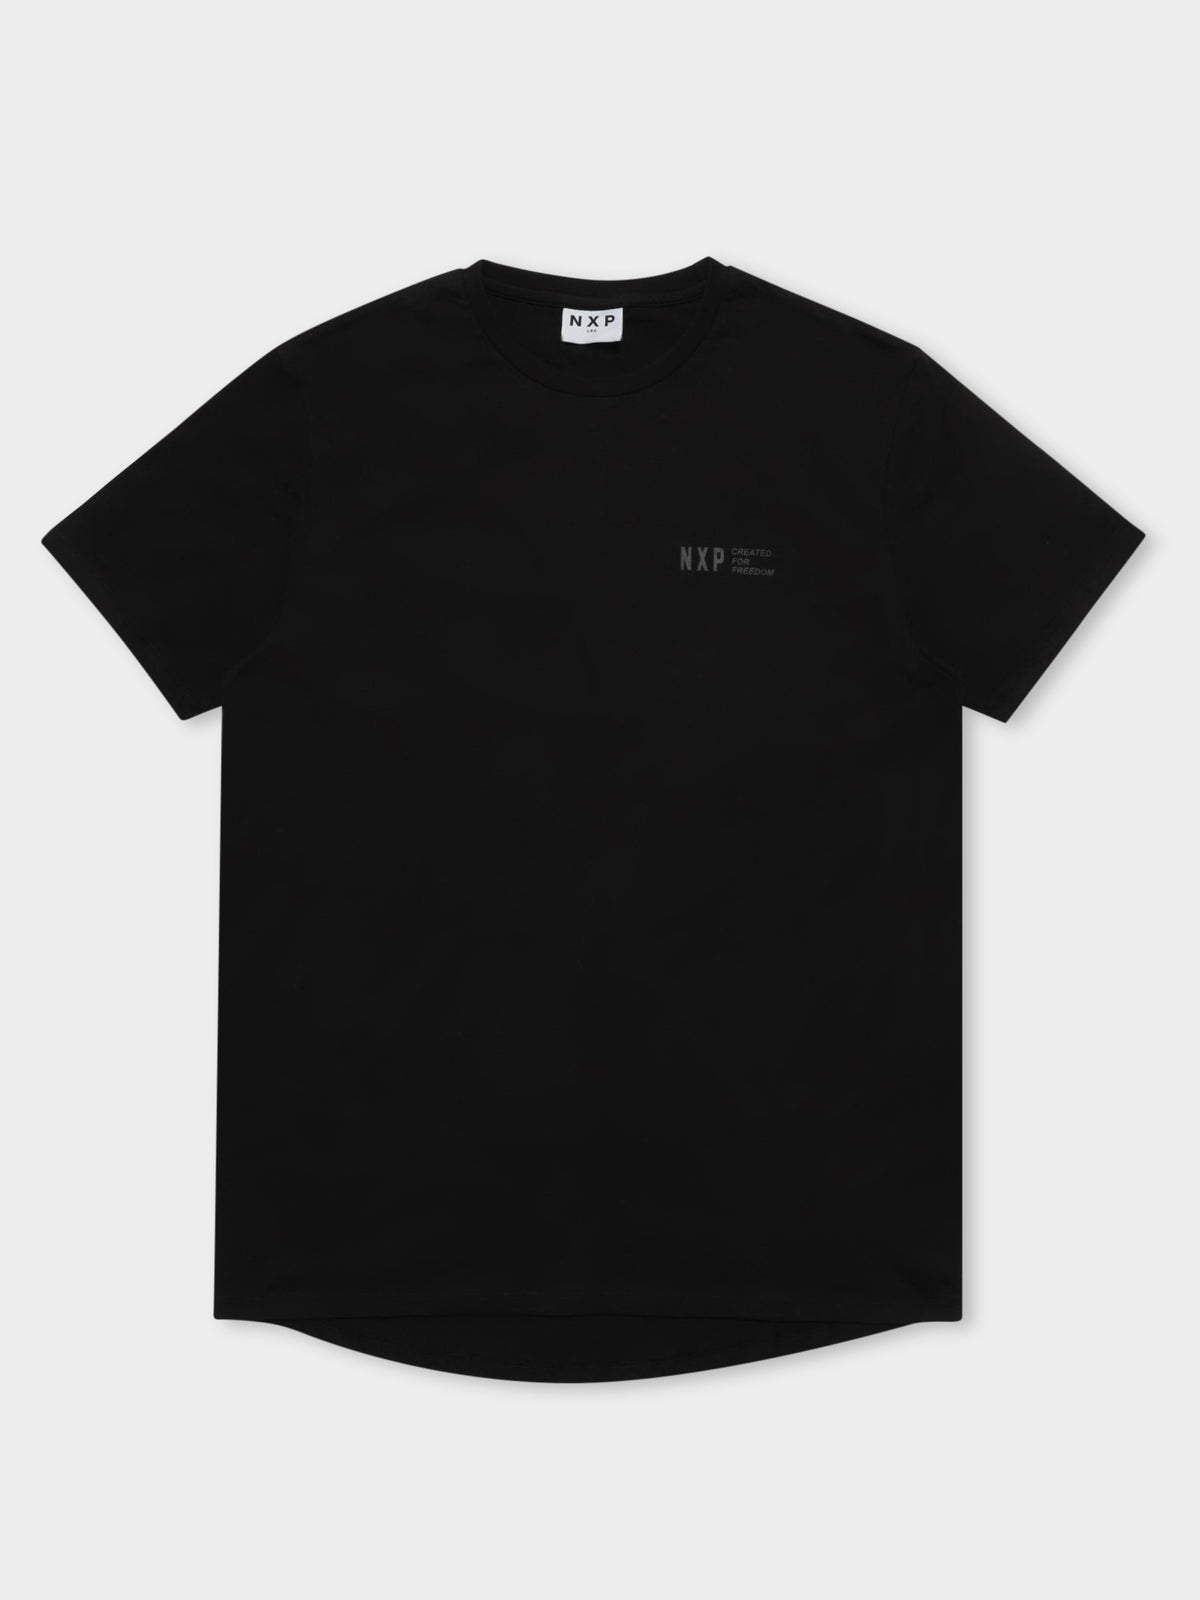 Watch Tower T-Shirt in Black